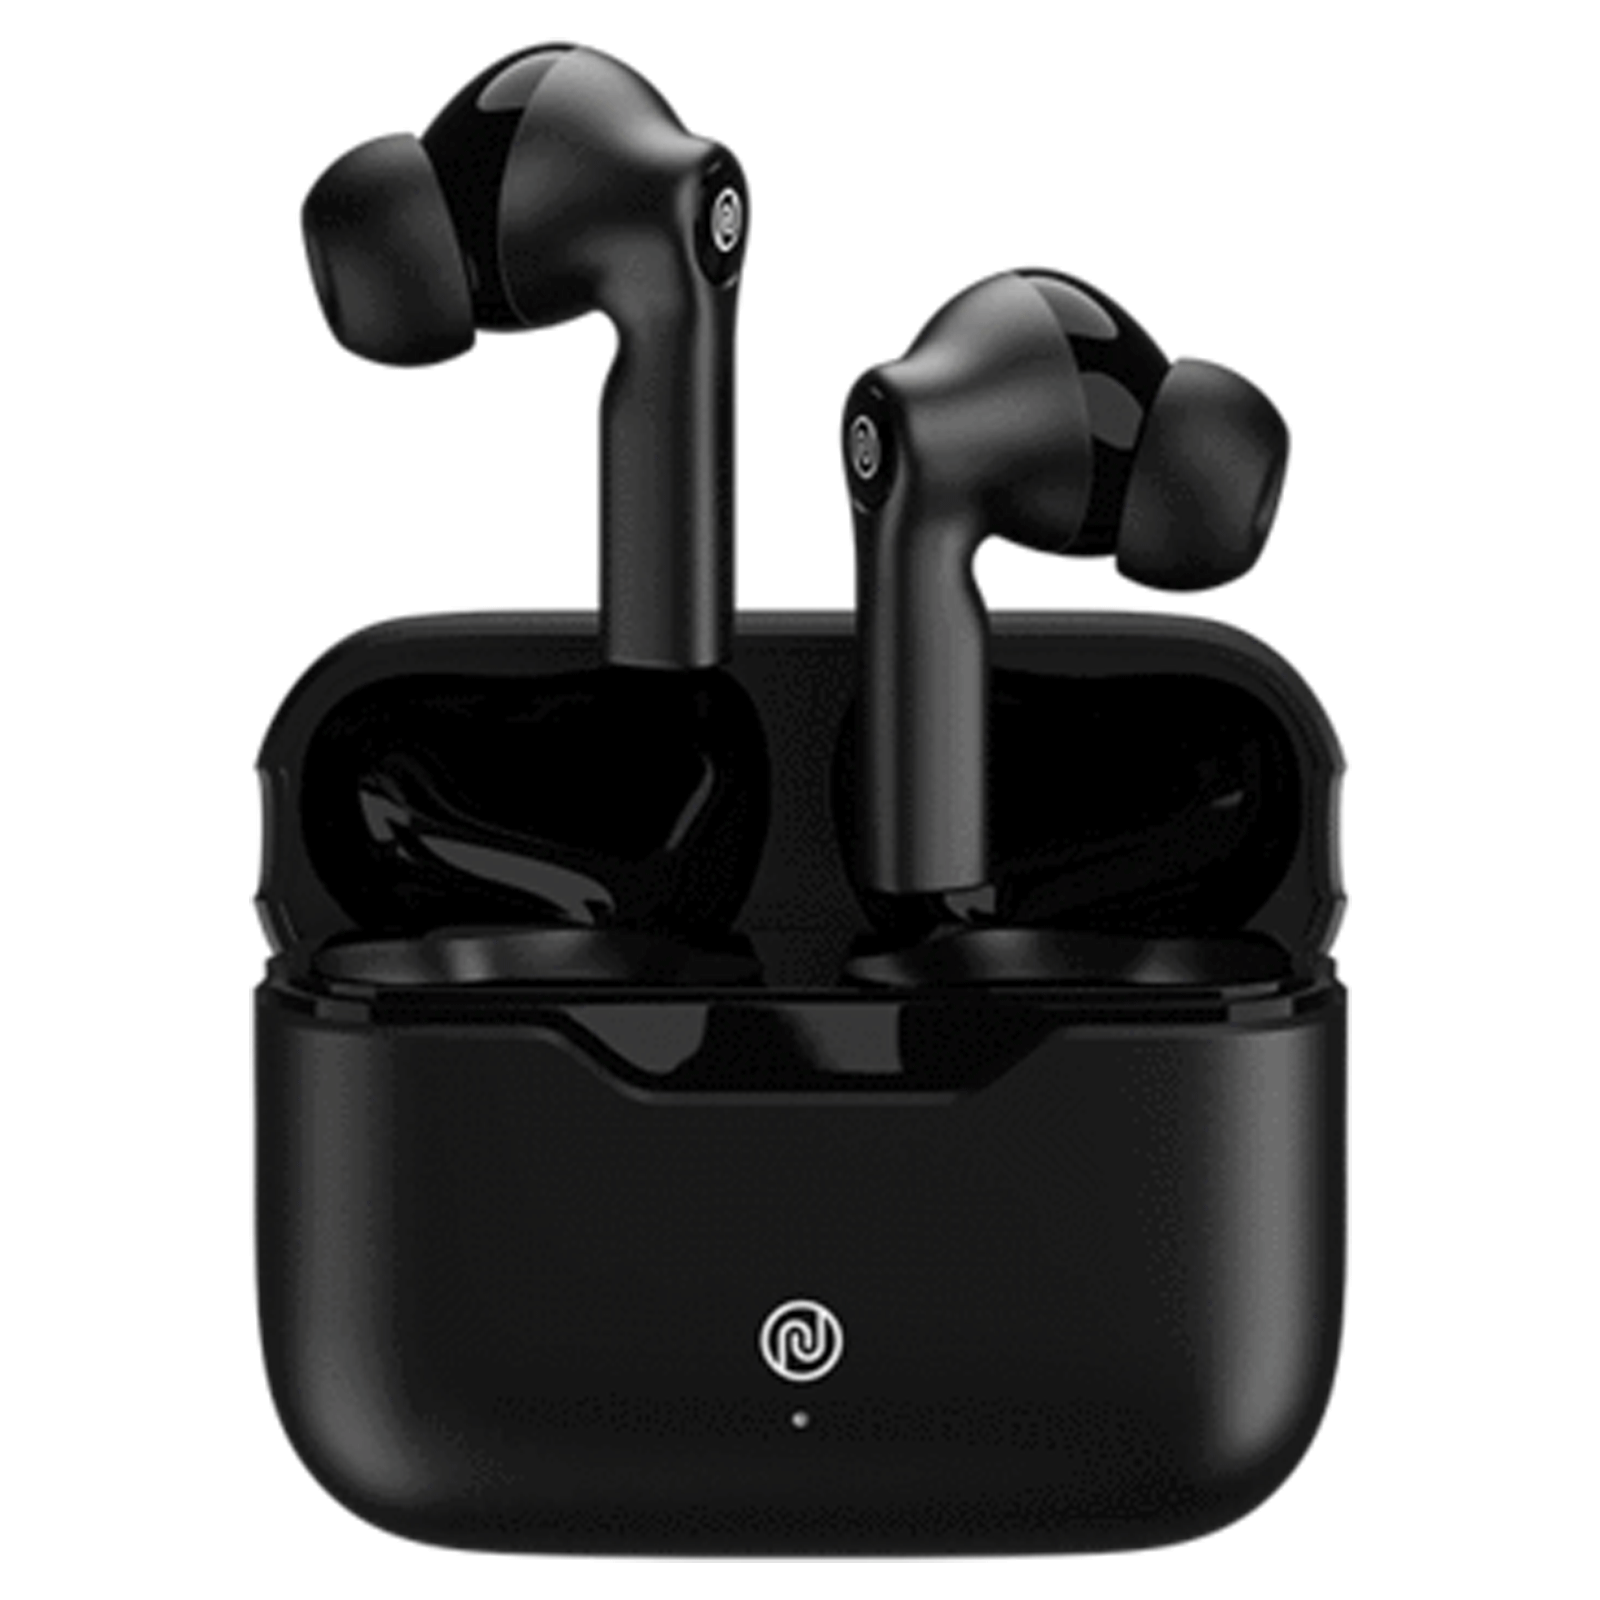 Noise Buds VS103 AUD-HDPHN-BUDSVS10 In-Ear Truly Wireless Earbuds with Mic (Bluetooth 5.0, Hyper Sync Technology, Jet Black)_1